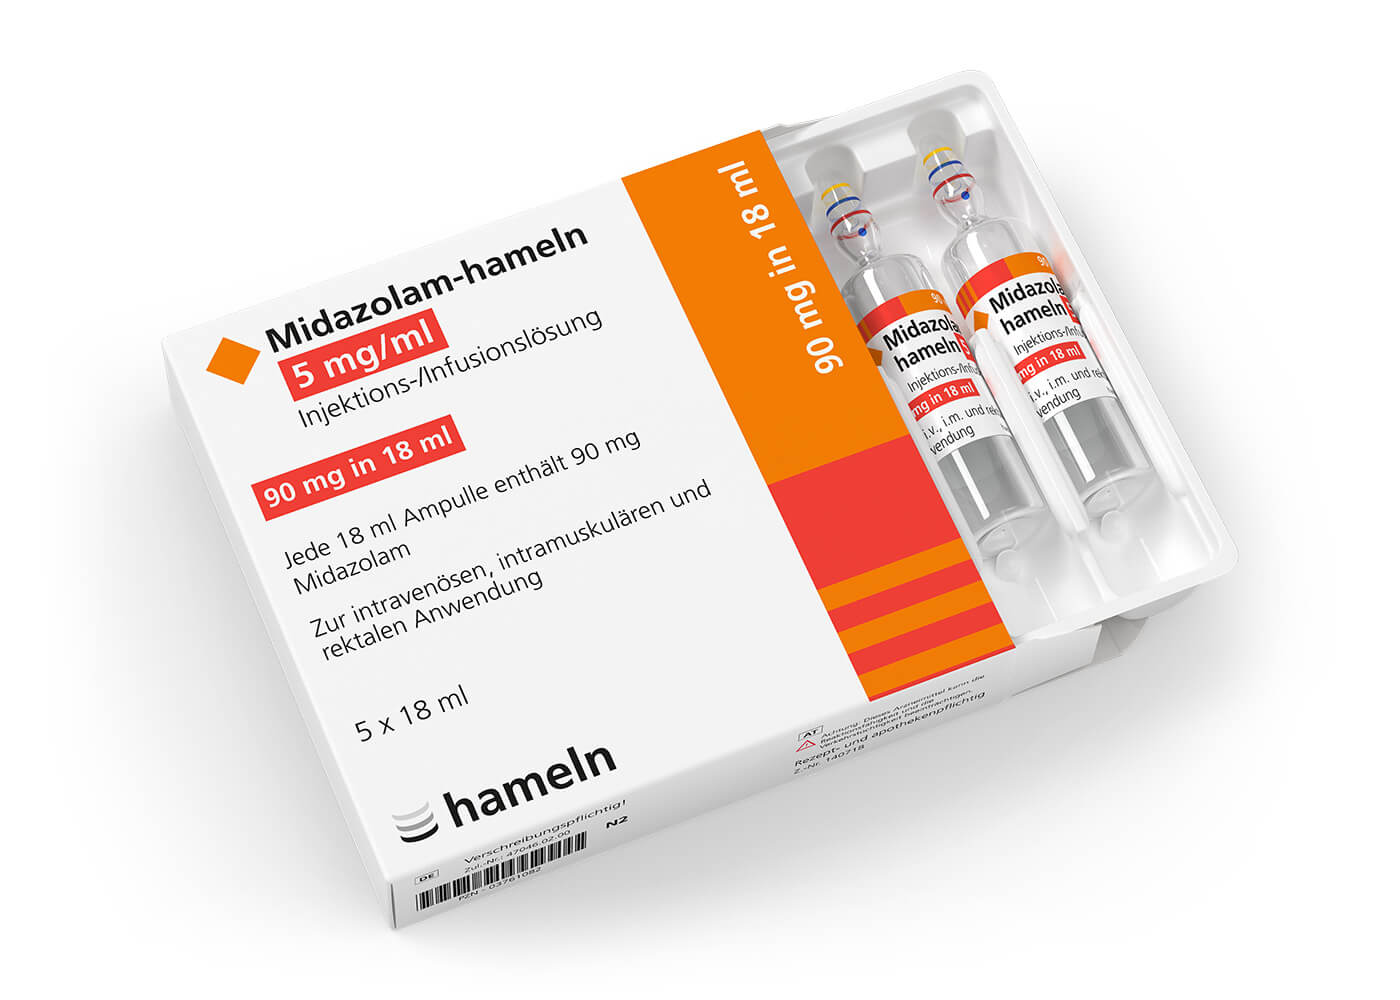 Midazolam_DE-AT_5_mg-ml_in_18_ml_Pack-Amp_5St_SH_2020-04